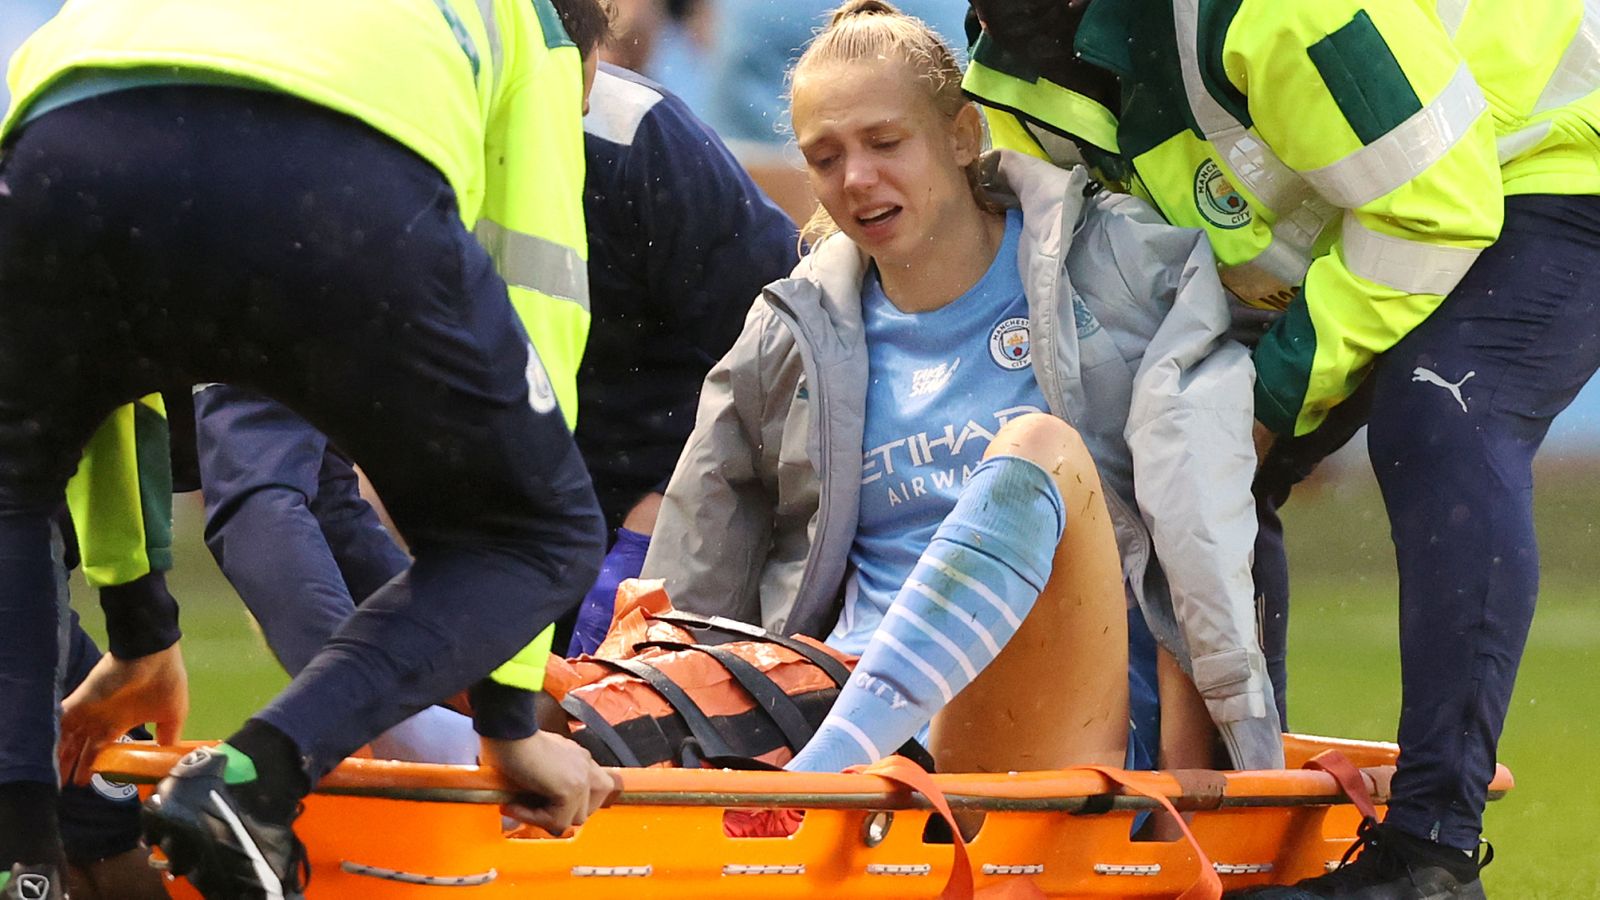 My name is Morgan: The Manchester City defender has been left out of the England double-header squad for the World Cup